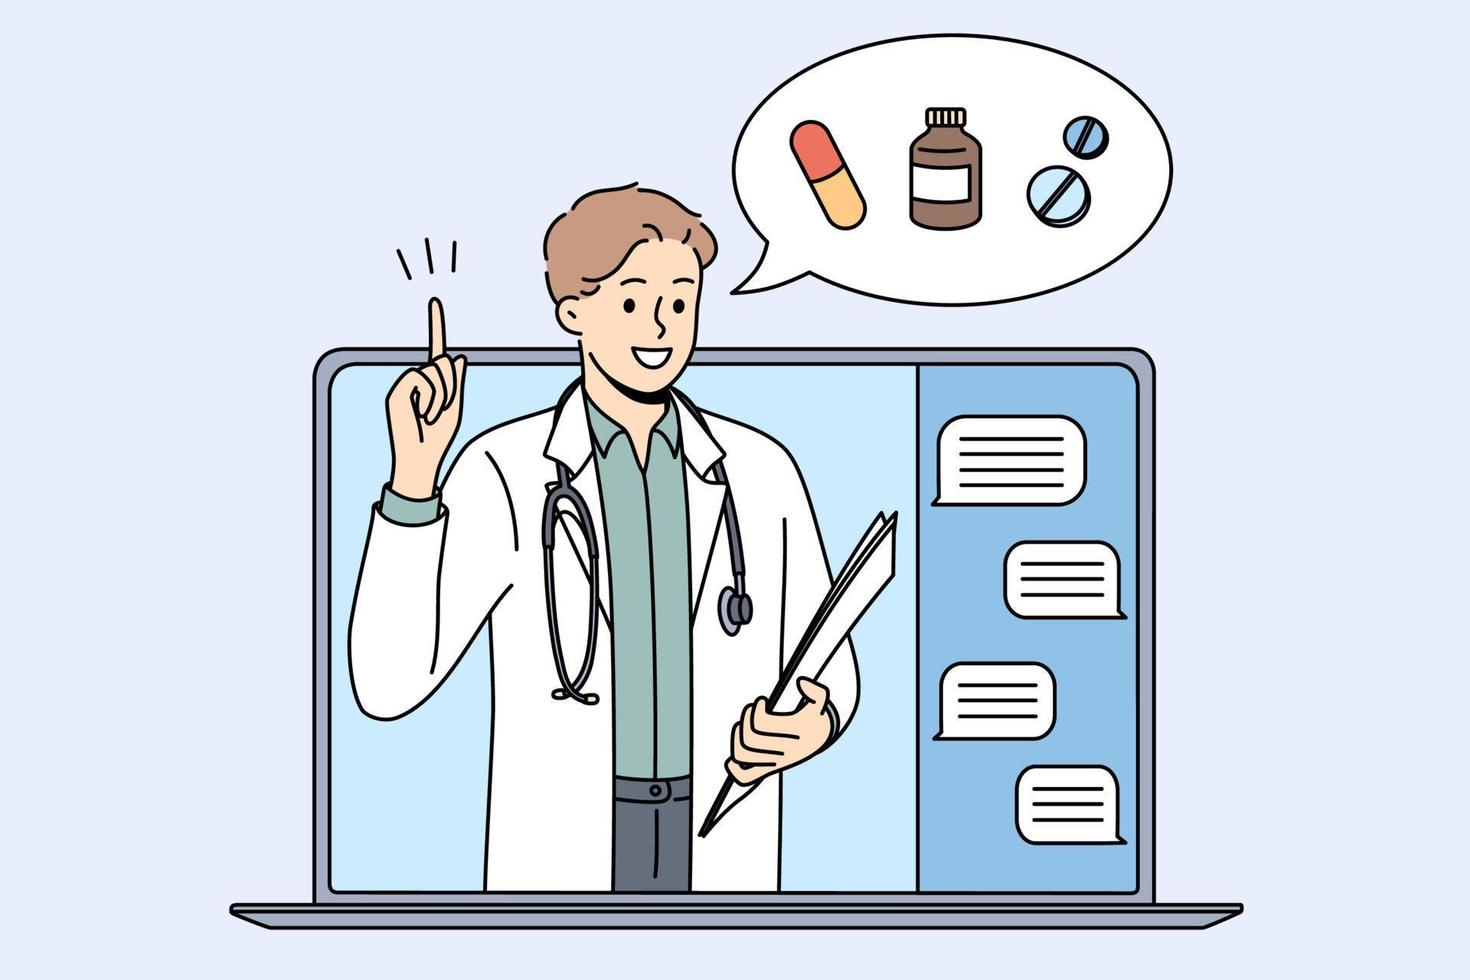 Online drugstore and pharmacy concept. Young smiling doctor pharmacist standing and showing pointing at drugs treatment online from laptop screen vector illustration